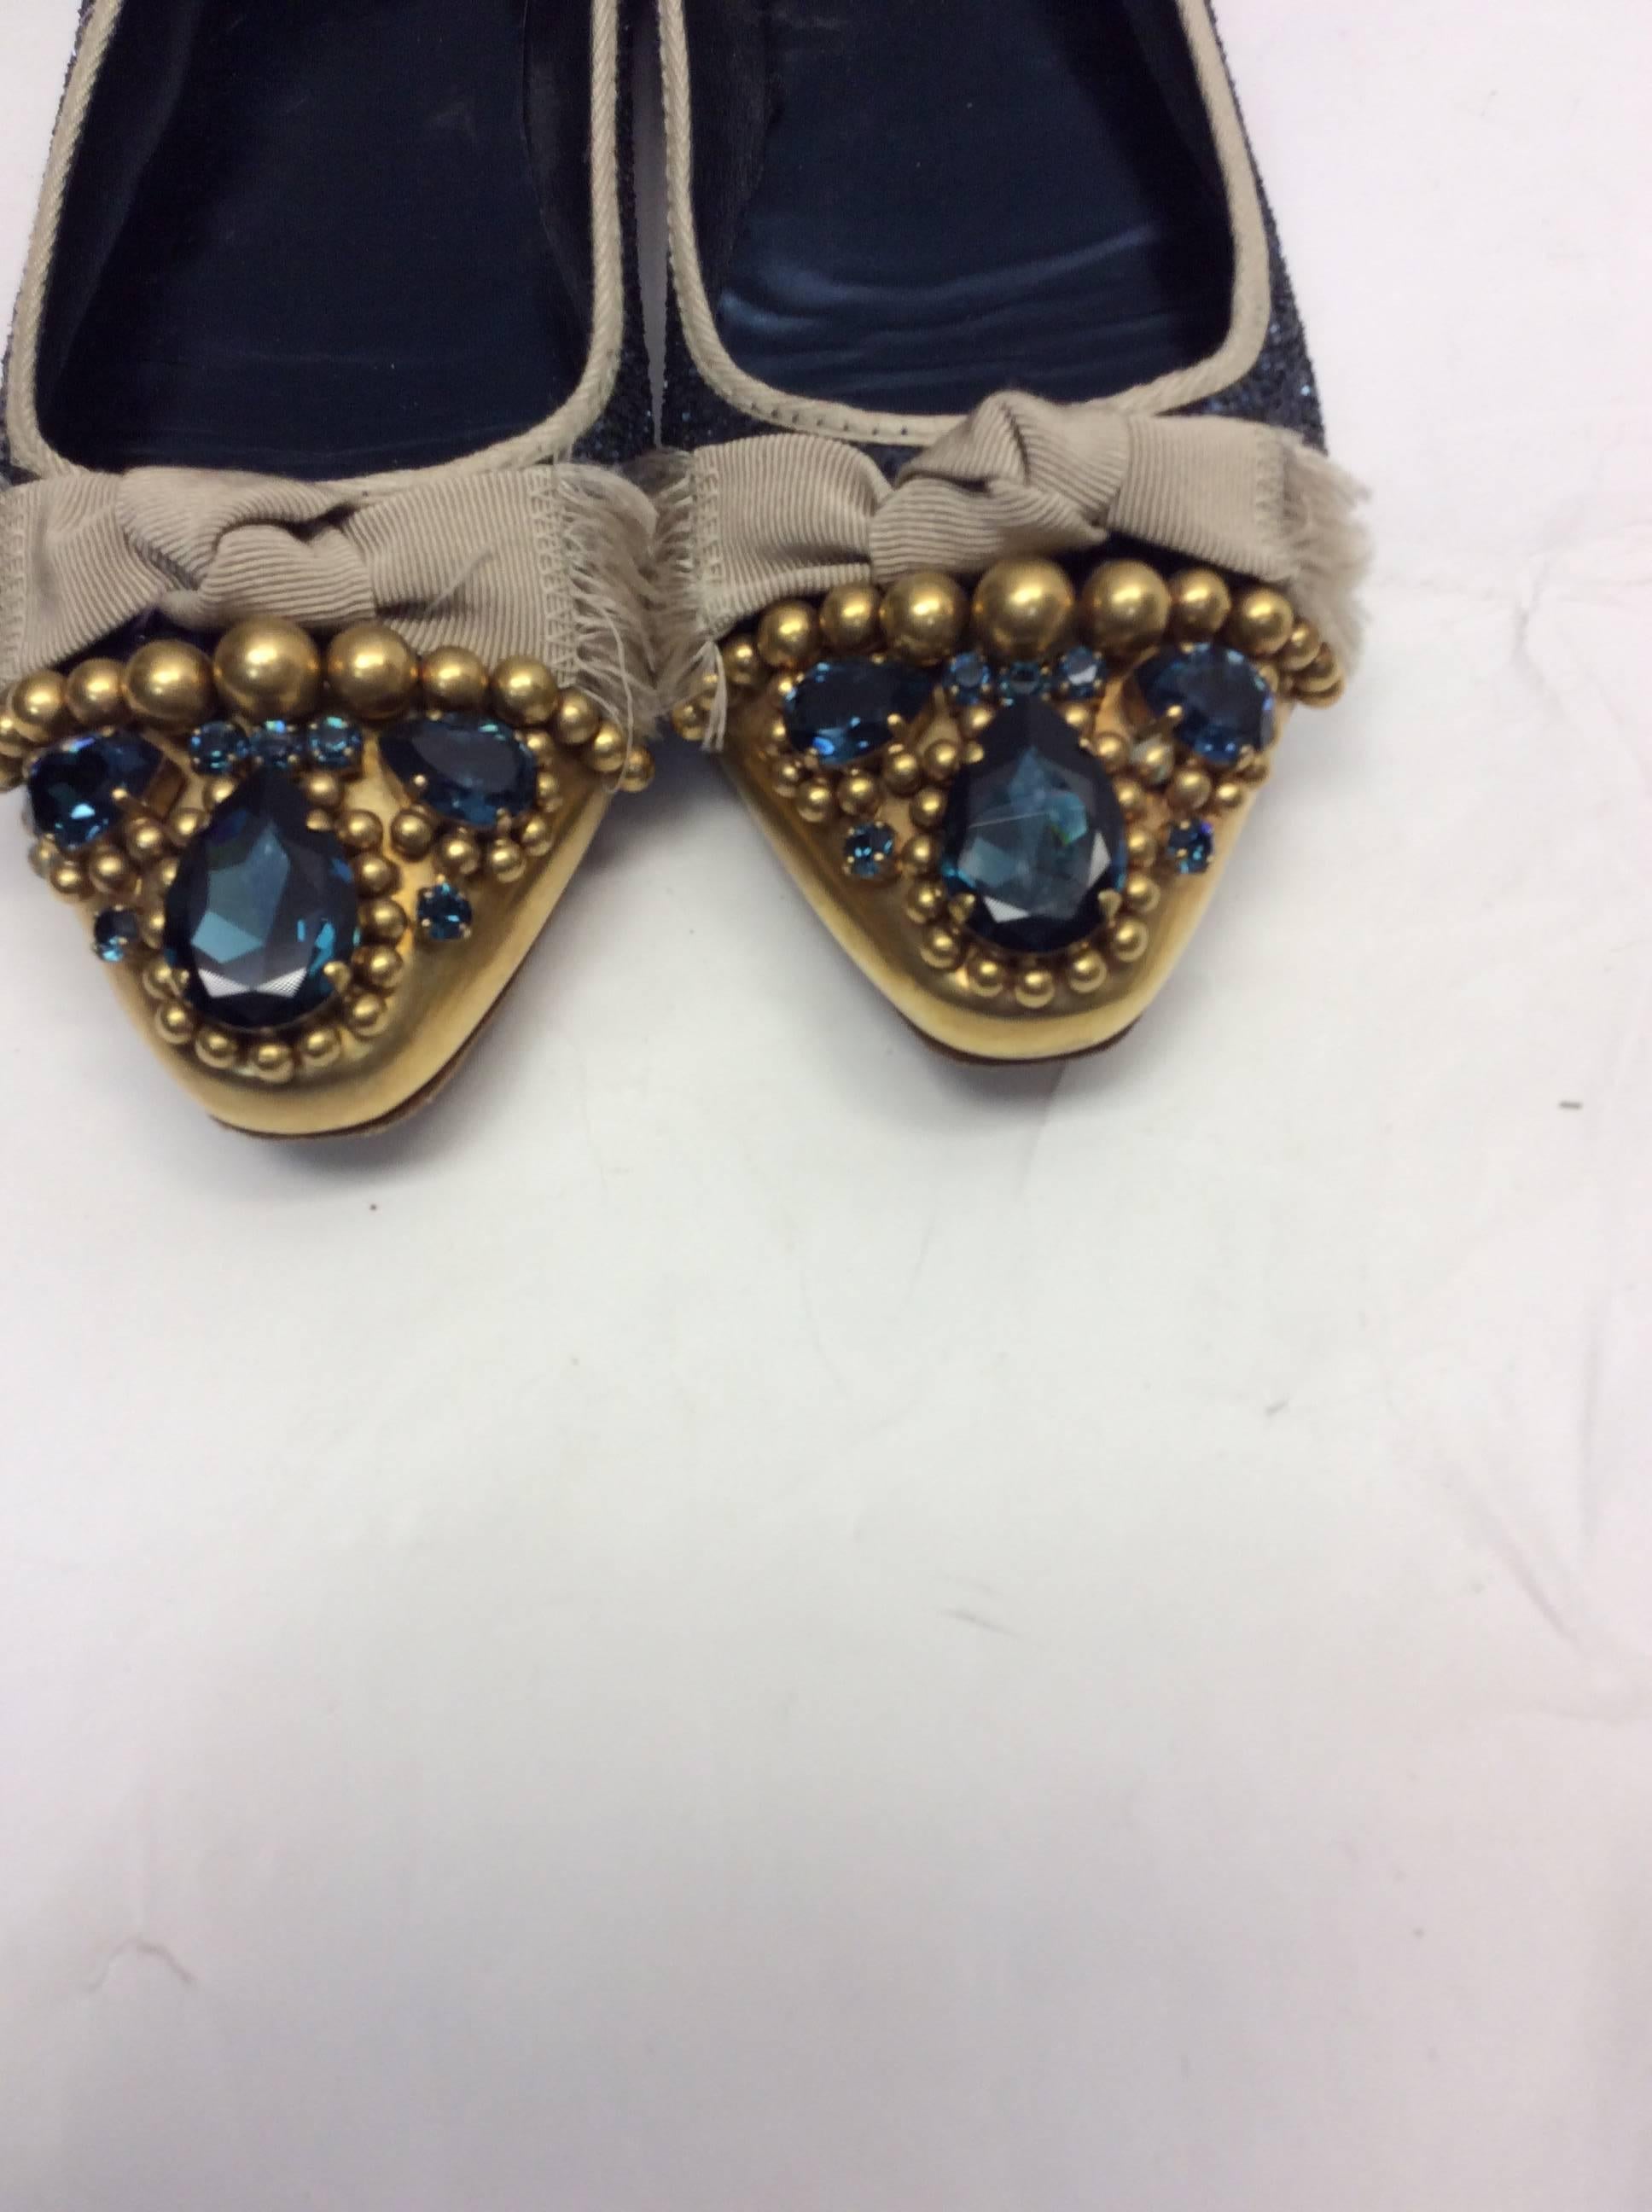 Miu Miu Blue Glitter Ballet Flats
Size 41
$199
Embellieshed canvas toe
Made in Italy